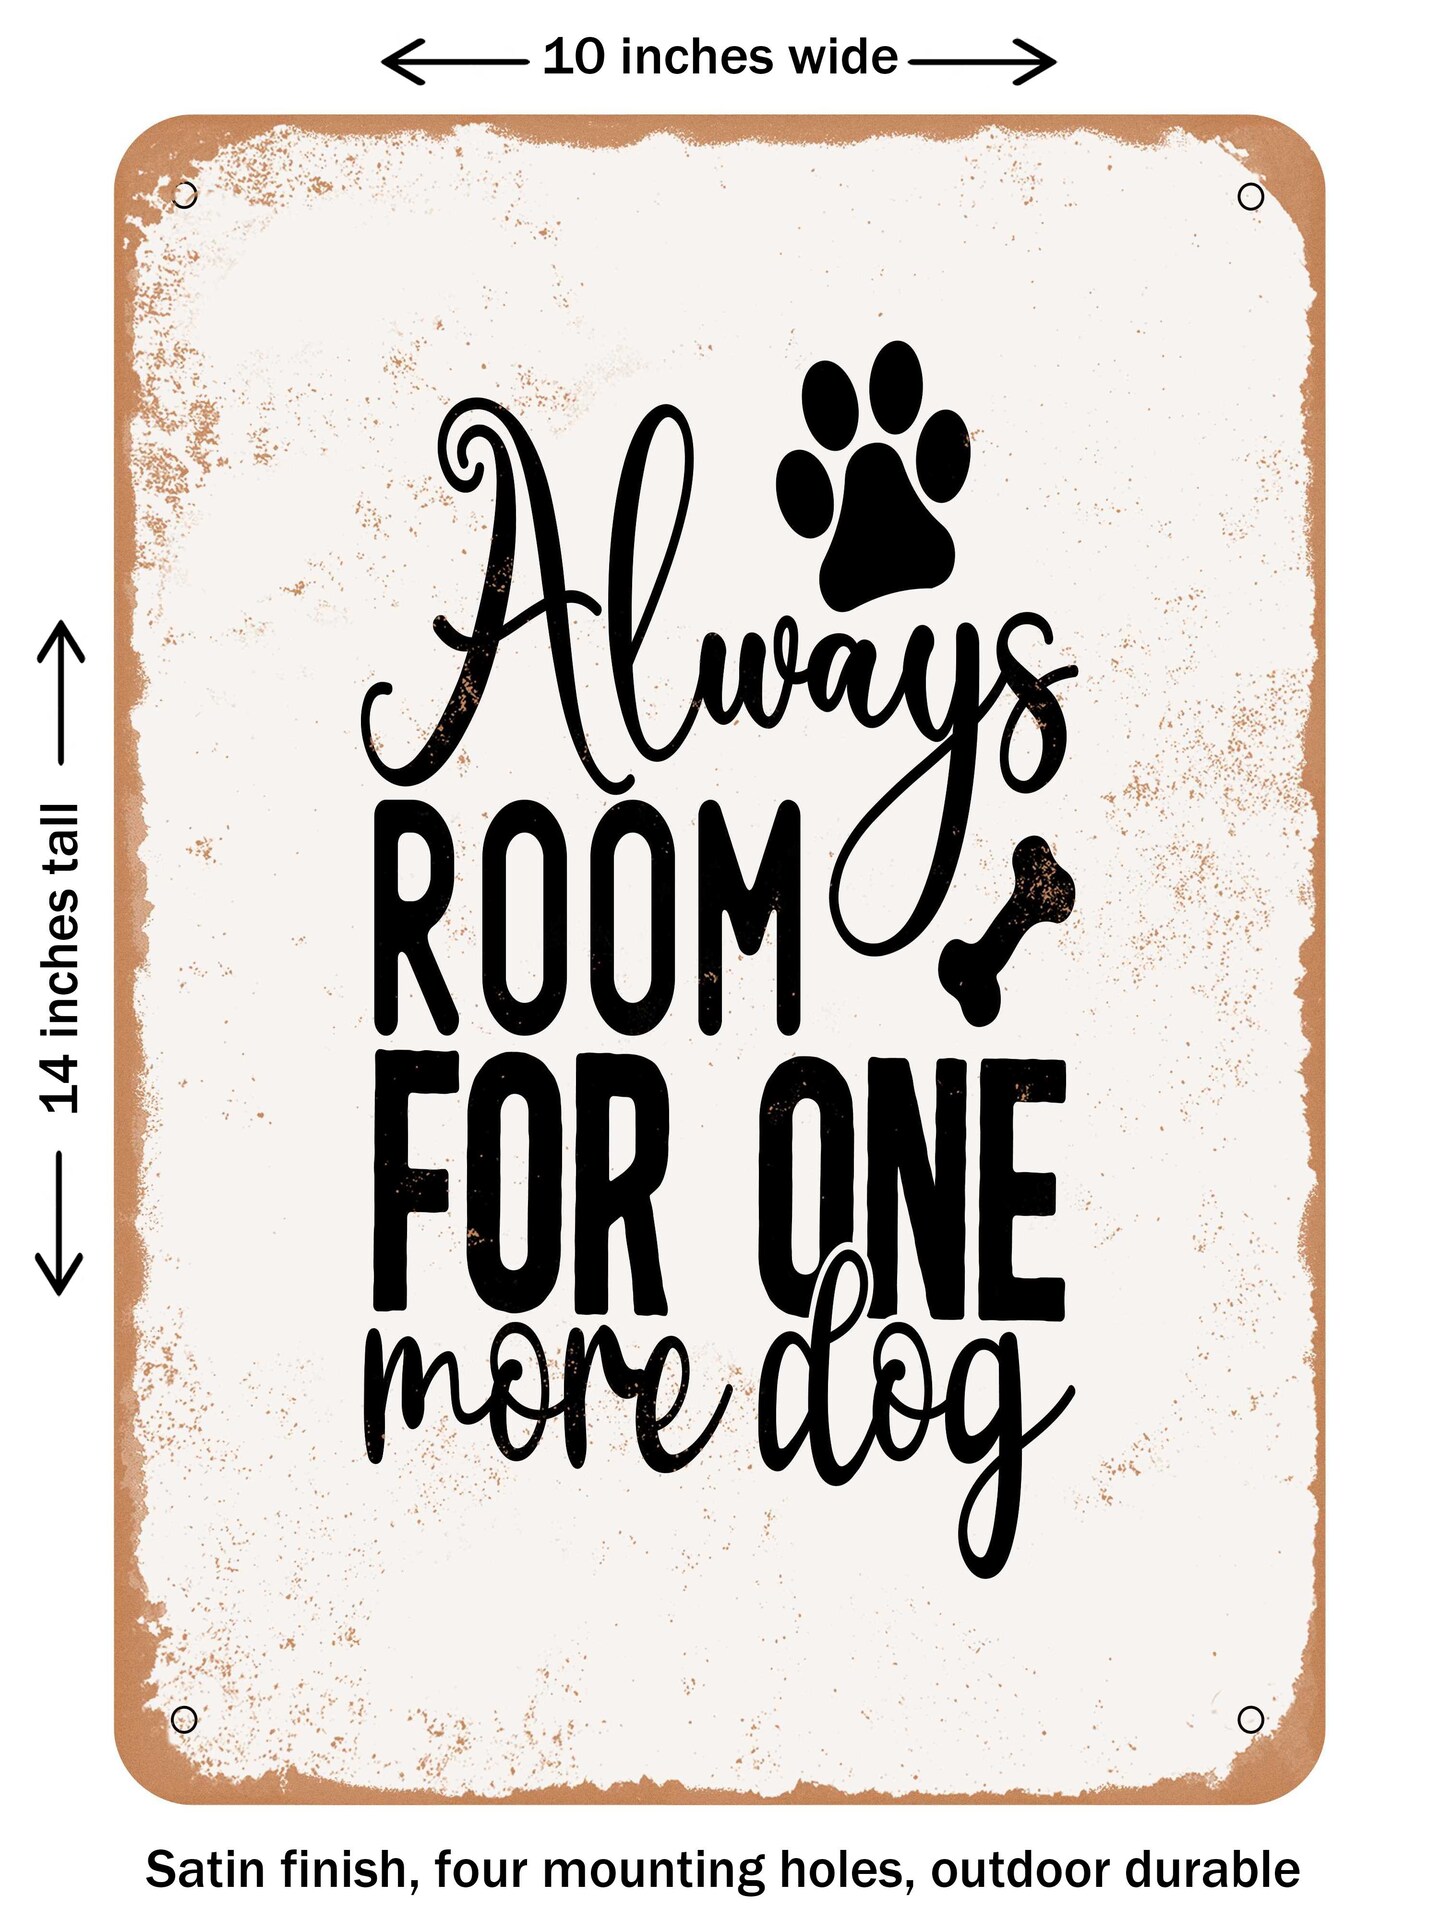 DECORATIVE METAL SIGN - Always Room For One More Dog  - Vintage Rusty Look